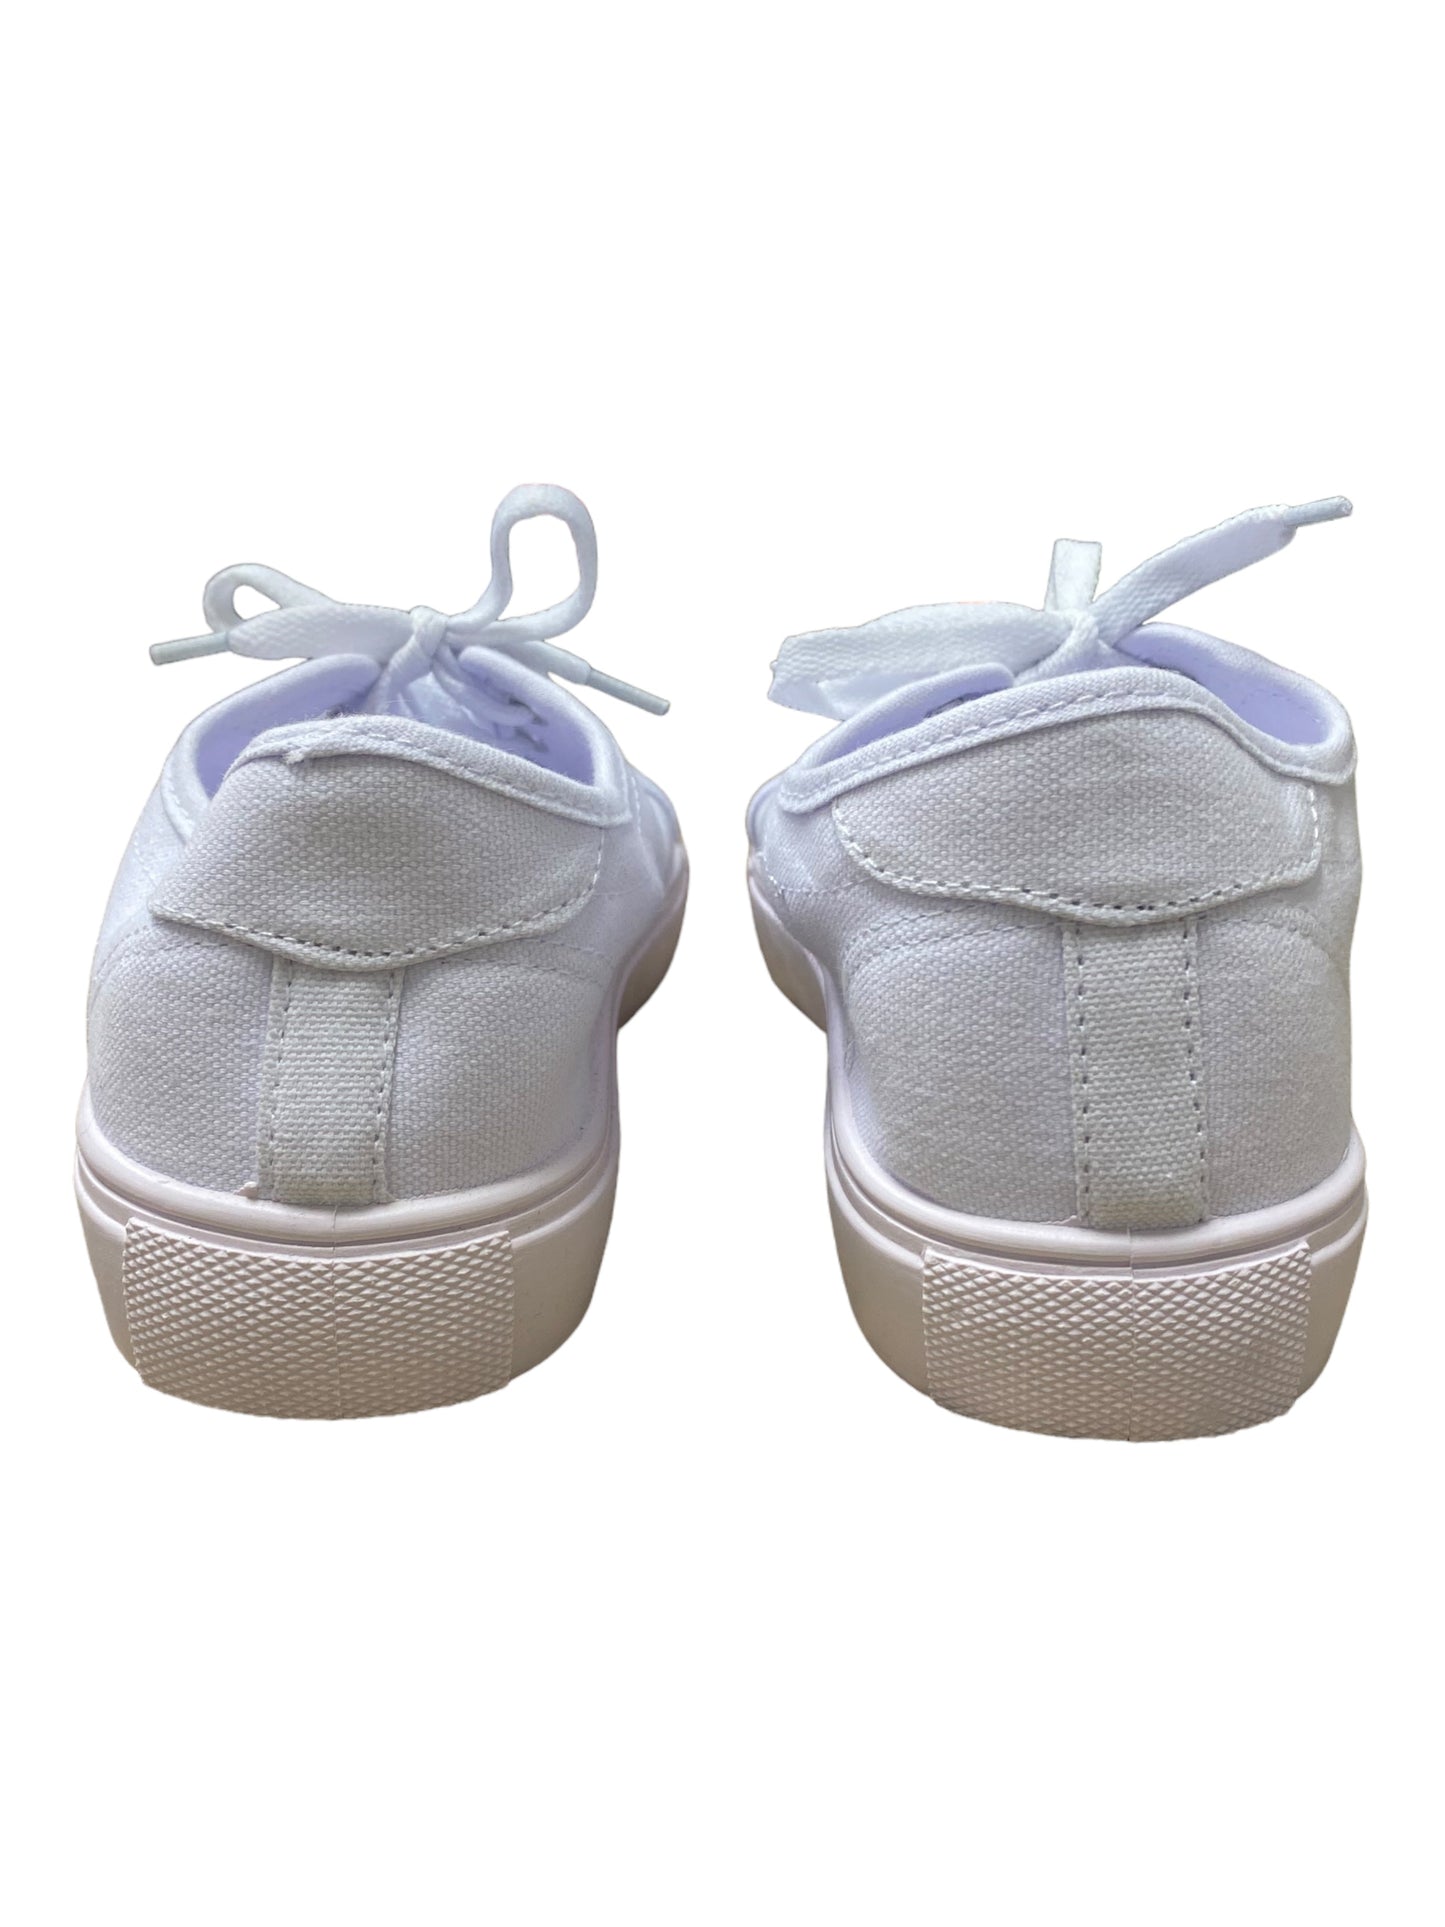 White Shoes Sneakers Asos, Size 8